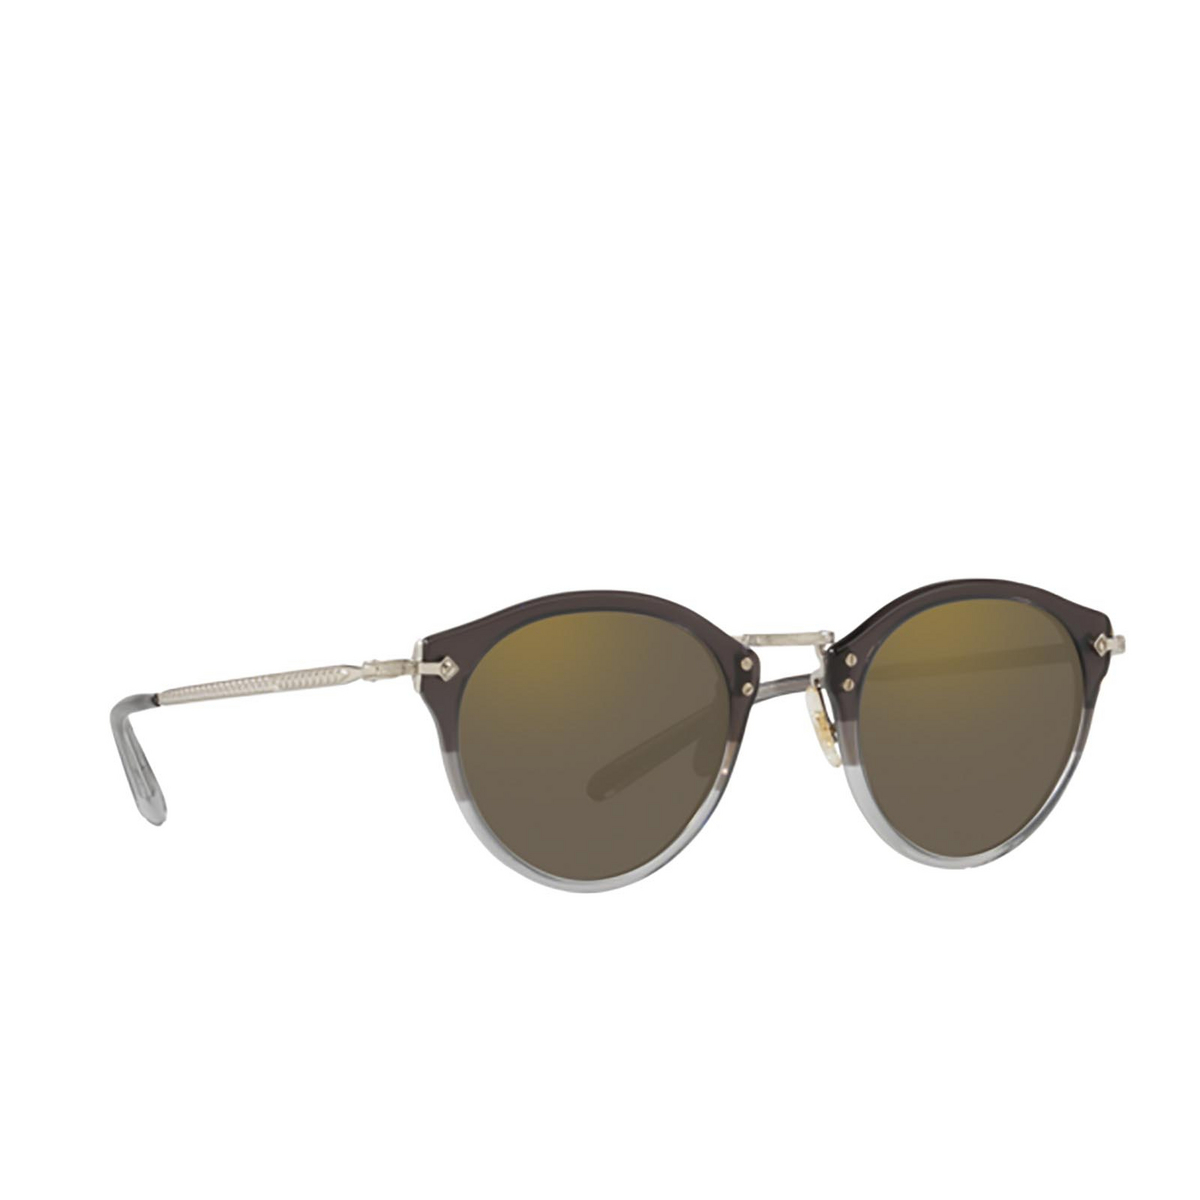 Oliver Peoples OP-505 Sunglasses 143639 - three-quarters view